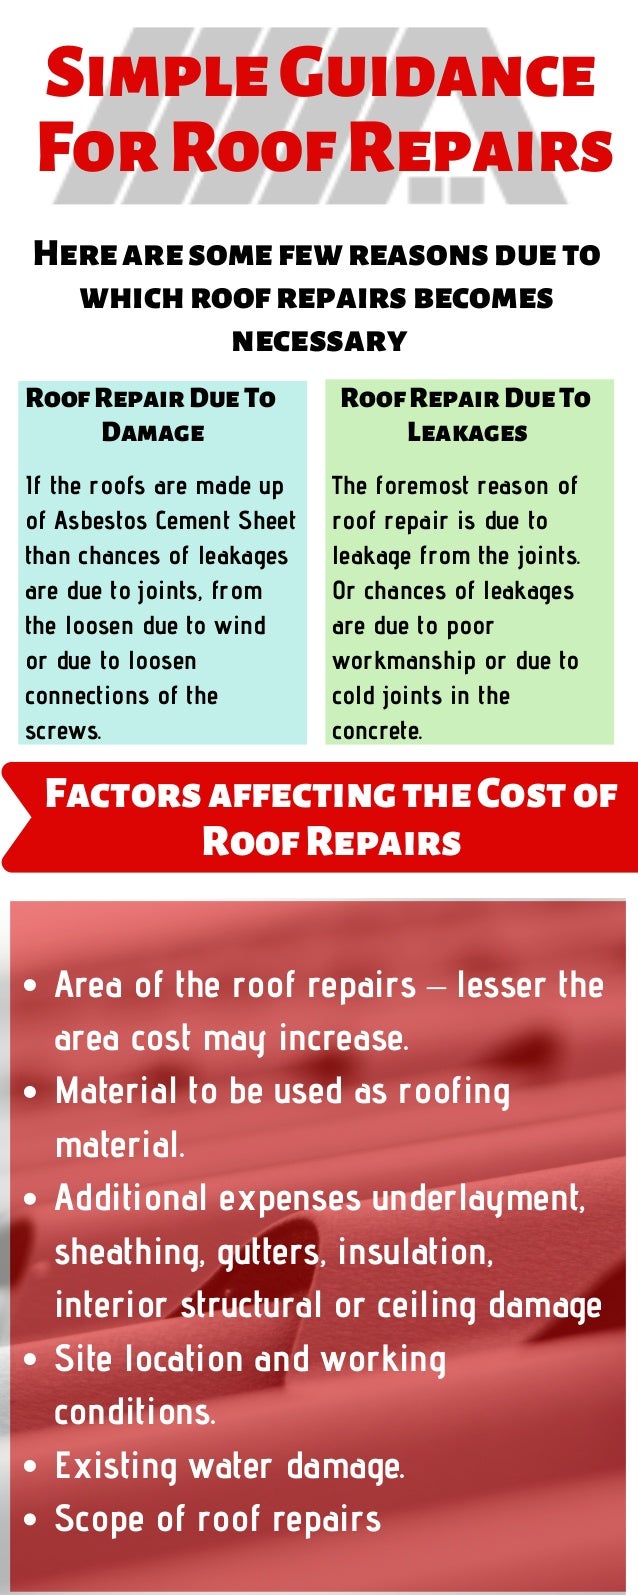 Simple Guidance For Roof Repairs